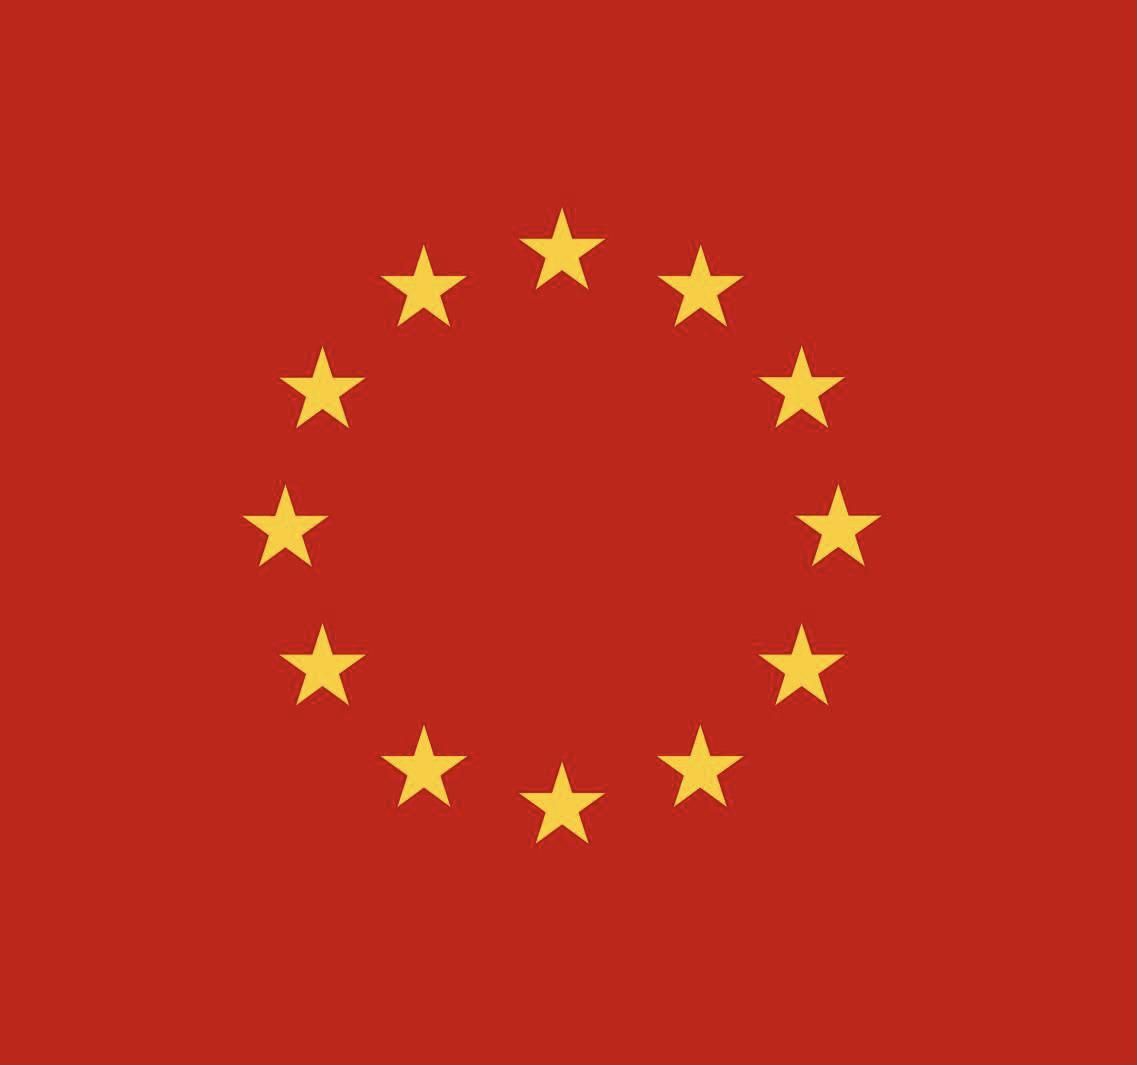 The election to the European Parliament of this year ended with the winning of the Ultracommunist Party of Europe (UCPE) by majority in the parliament